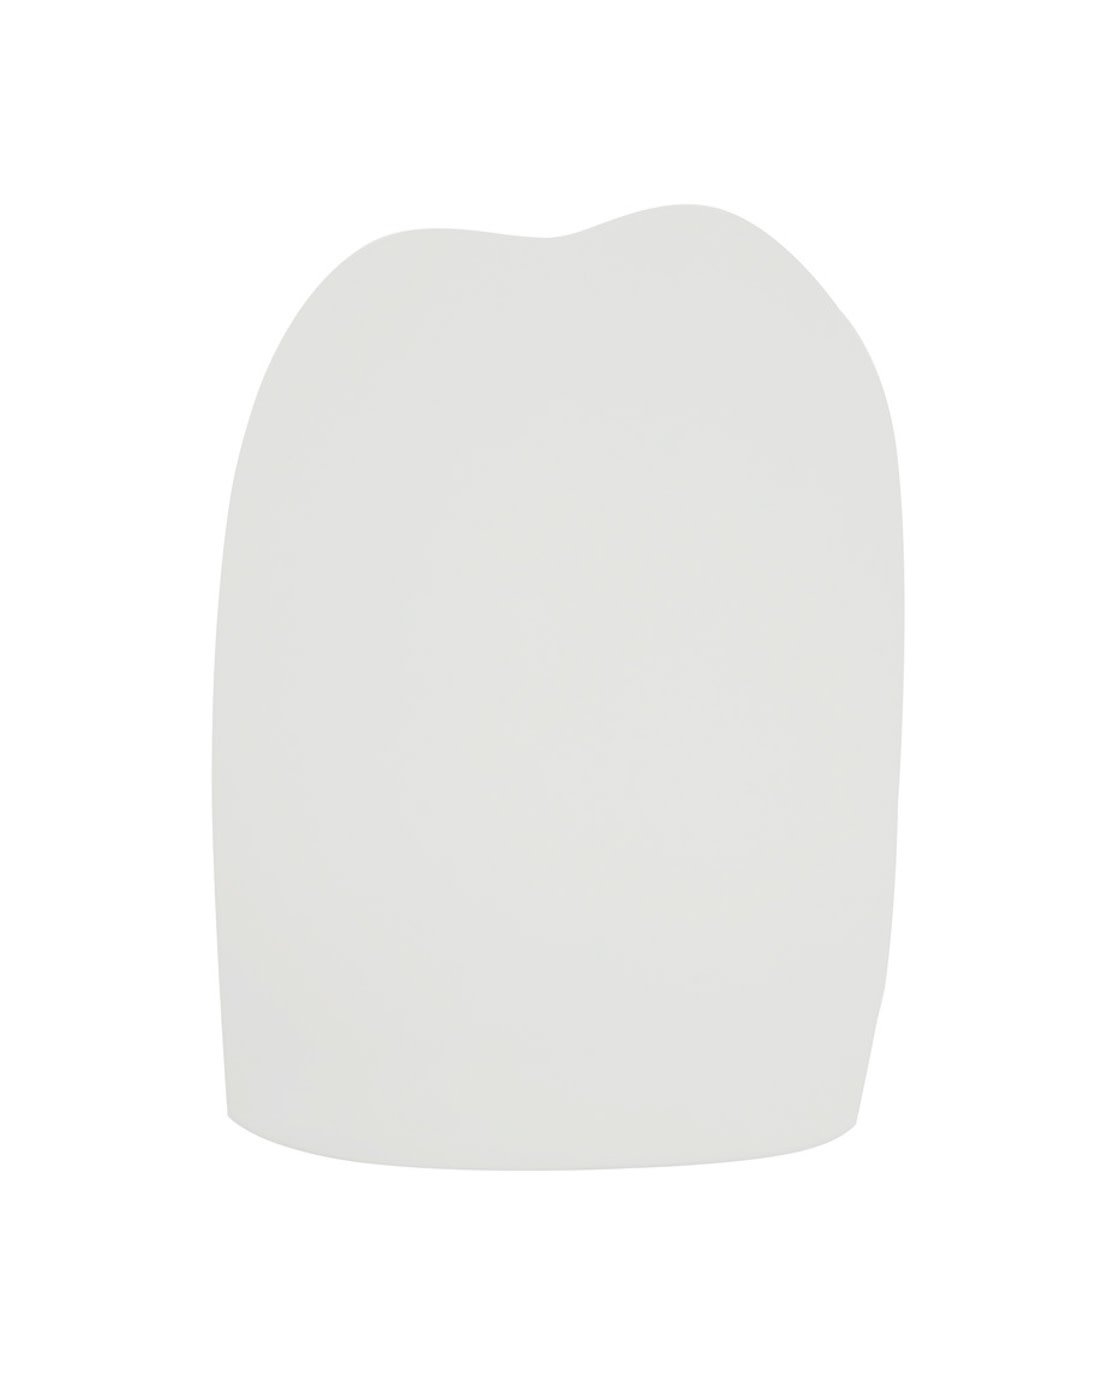 Clare Paint, Penthouse, Wall Paint Eggshell, Swatch - Image 1